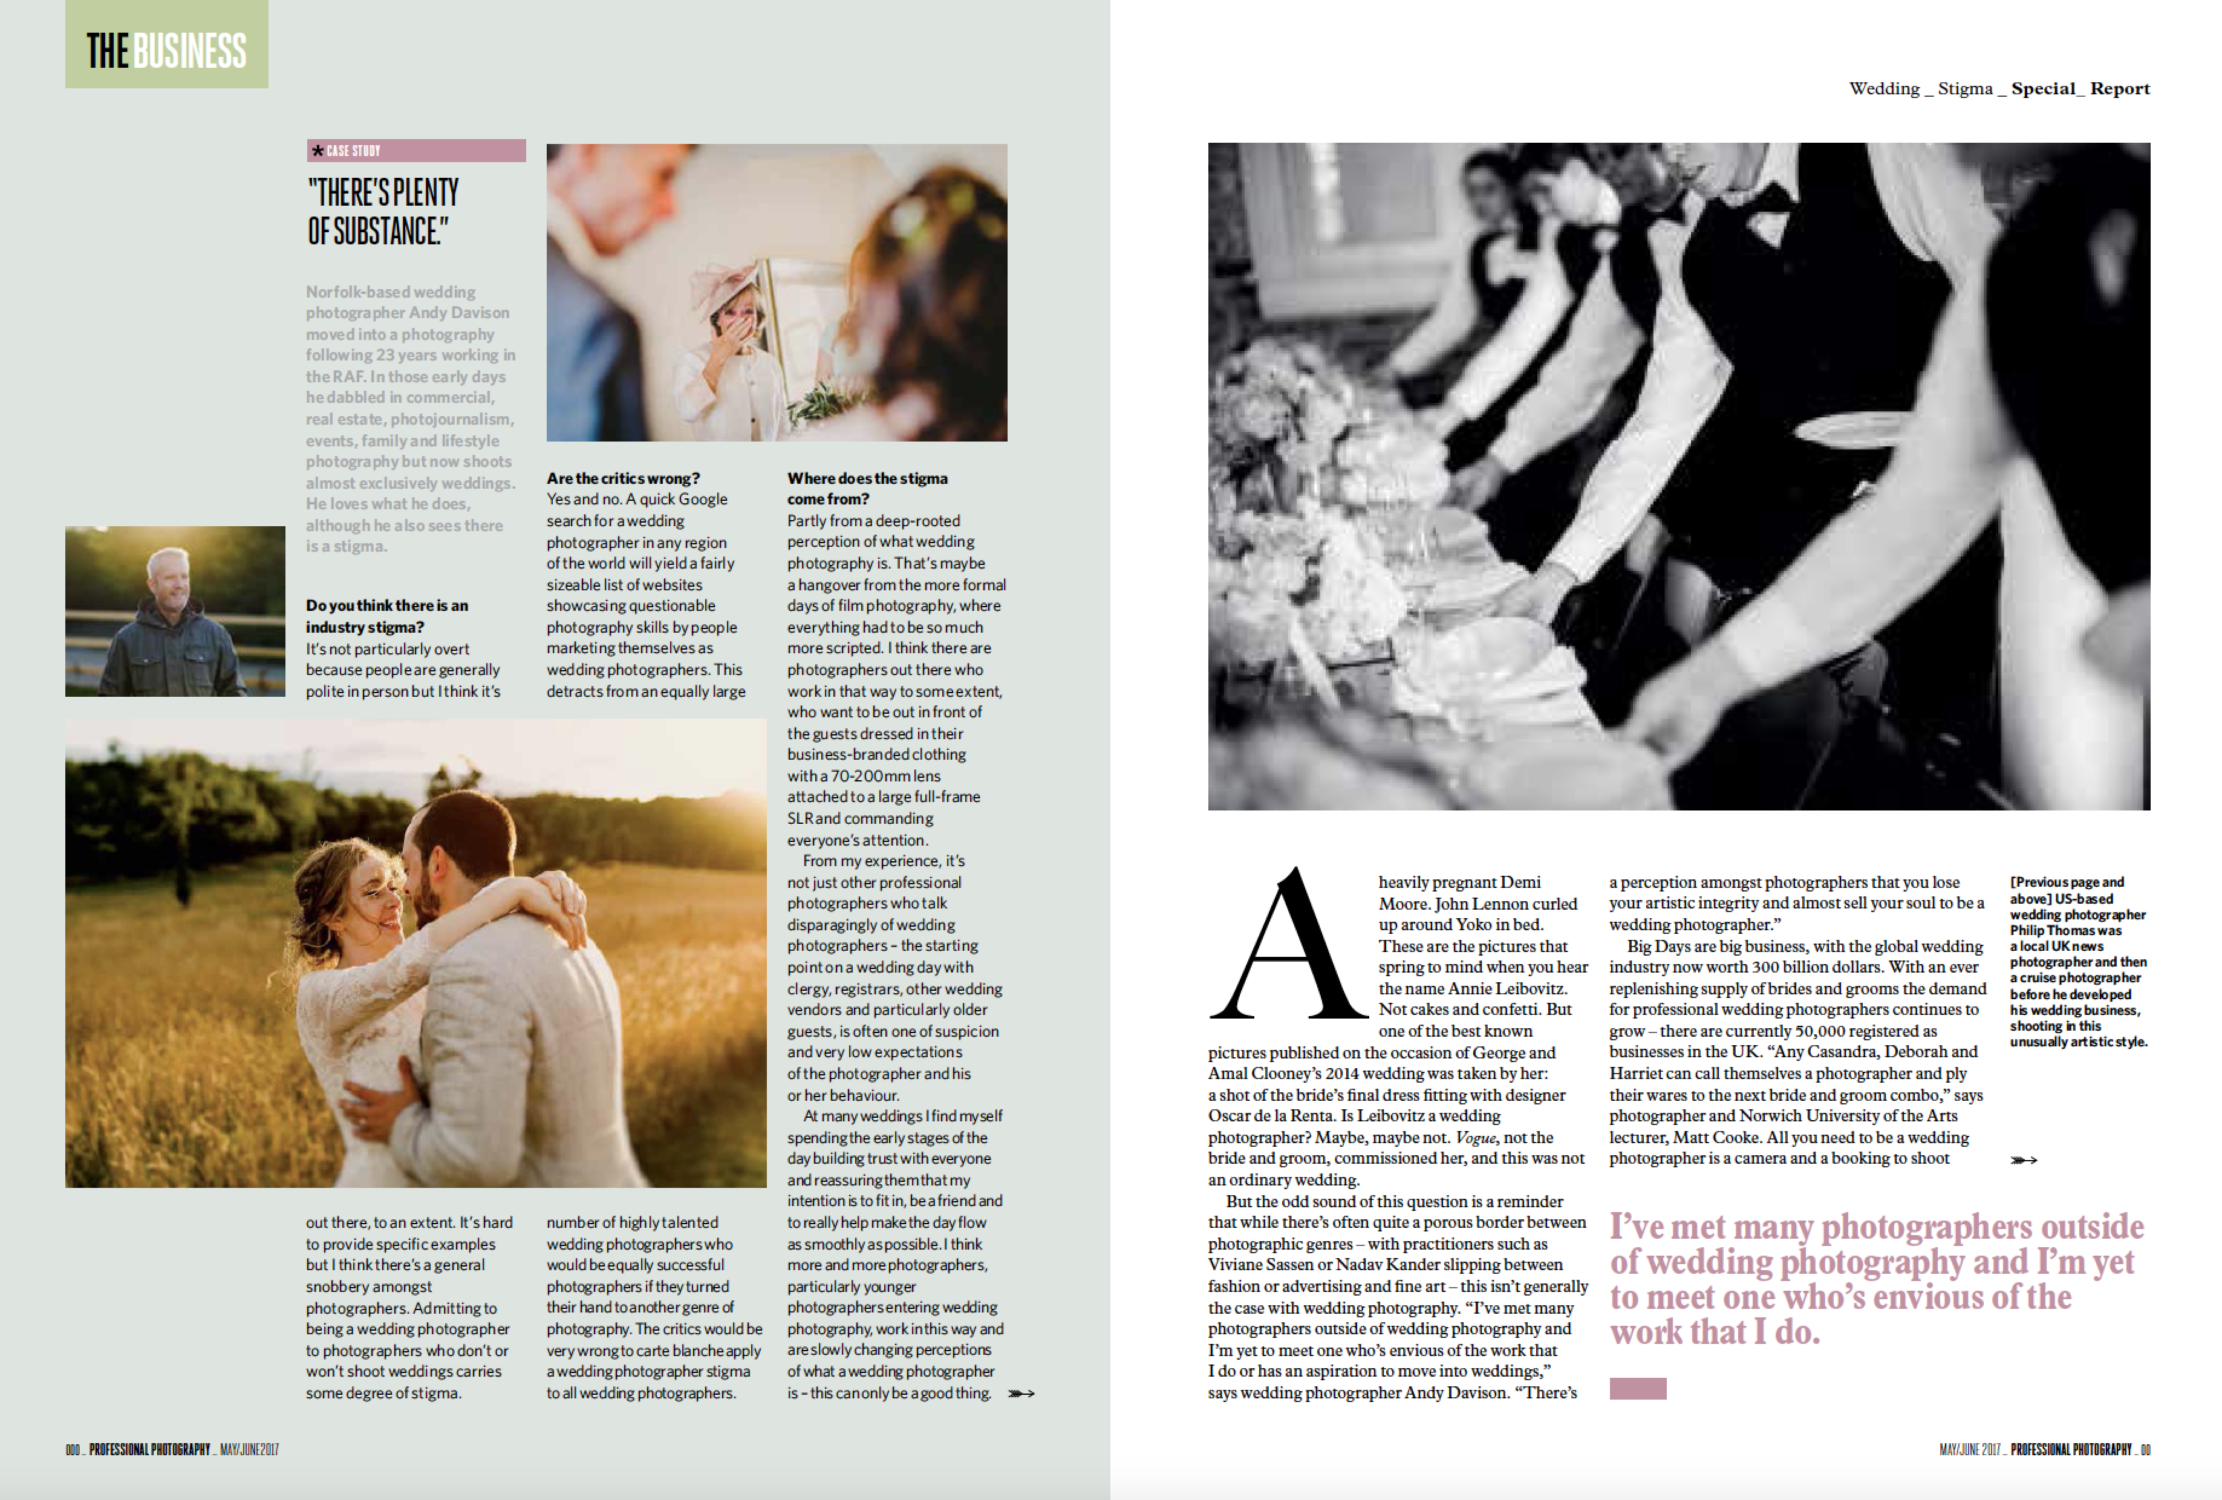 Do wedding photographers deserve our respect? Page 2 of 4 courtesy of Professional Photography Magazine